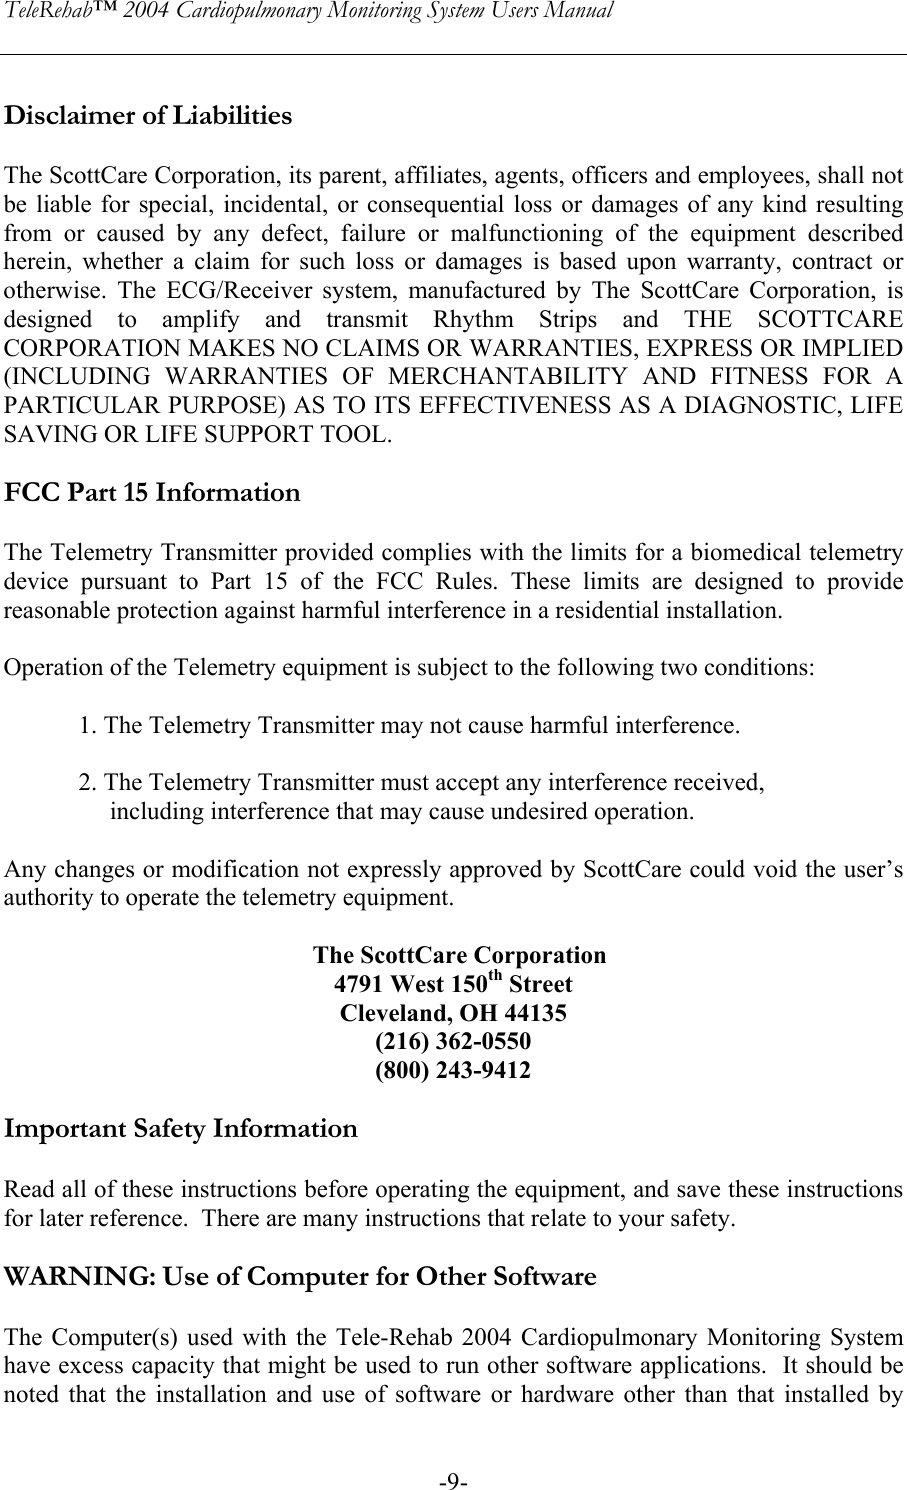 TeleRehab™ 2004 Cardiopulmonary Monitoring System Users Manual    -9- Disclaimer of Liabilities  The ScottCare Corporation, its parent, affiliates, agents, officers and employees, shall not be liable for special, incidental, or consequential loss or damages of any kind resulting from or caused by any defect, failure or malfunctioning of the equipment described herein, whether a claim for such loss or damages is based upon warranty, contract or otherwise. The ECG/Receiver system, manufactured by The ScottCare Corporation, is designed to amplify and transmit Rhythm Strips and THE SCOTTCARE CORPORATION MAKES NO CLAIMS OR WARRANTIES, EXPRESS OR IMPLIED  (INCLUDING WARRANTIES OF MERCHANTABILITY AND FITNESS FOR A PARTICULAR PURPOSE) AS TO ITS EFFECTIVENESS AS A DIAGNOSTIC, LIFE SAVING OR LIFE SUPPORT TOOL.  FCC Part 15 Information  The Telemetry Transmitter provided complies with the limits for a biomedical telemetry device pursuant to Part 15 of the FCC Rules. These limits are designed to provide reasonable protection against harmful interference in a residential installation.  Operation of the Telemetry equipment is subject to the following two conditions:  1. The Telemetry Transmitter may not cause harmful interference.  2. The Telemetry Transmitter must accept any interference received,       including interference that may cause undesired operation.  Any changes or modification not expressly approved by ScottCare could void the user’s authority to operate the telemetry equipment.    The ScottCare Corporation 4791 West 150th Street Cleveland, OH 44135 (216) 362-0550 (800) 243-9412  Important Safety Information  Read all of these instructions before operating the equipment, and save these instructions for later reference.  There are many instructions that relate to your safety.    WARNING: Use of Computer for Other Software  The Computer(s) used with the Tele-Rehab 2004 Cardiopulmonary Monitoring System have excess capacity that might be used to run other software applications.  It should be noted that the installation and use of software or hardware other than that installed by 